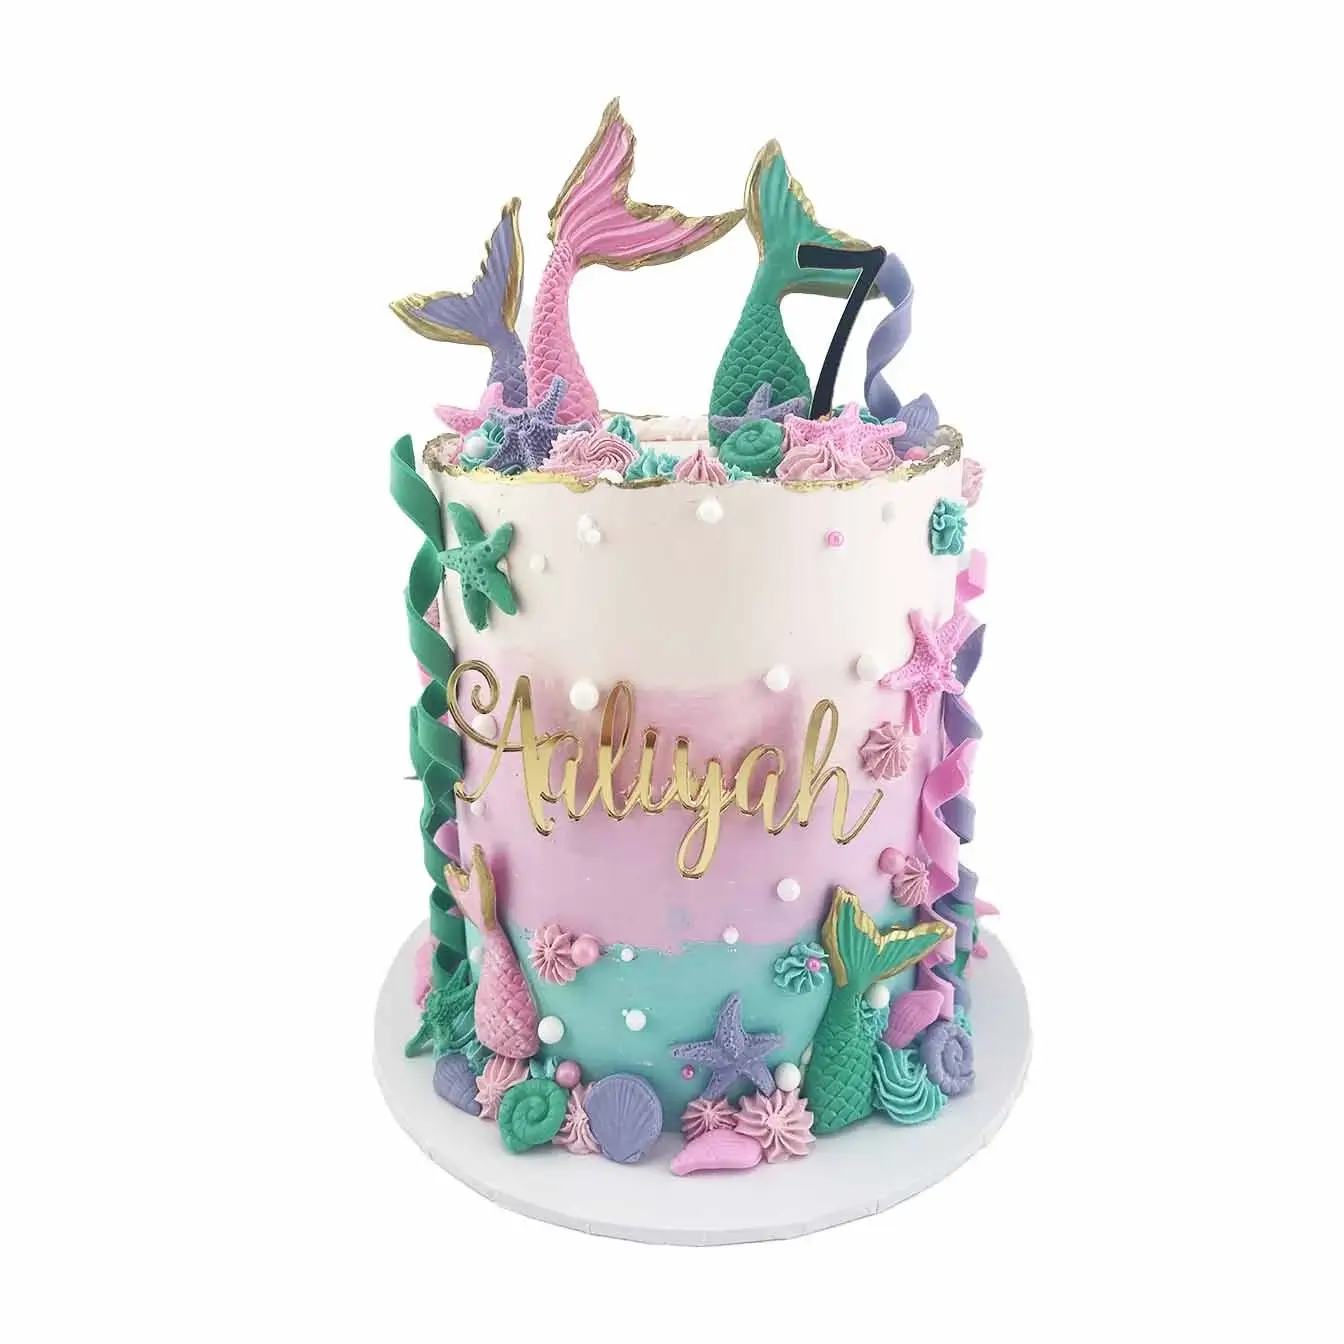 Enchanting Mermaid Dreams Cake - A tall cake in shades of pink, purple, and teal, featuring piped features, sprinkles, moulded mermaid tails, and under the sea shells and coral, a captivating centerpiece that transports you to a magical underwater world.